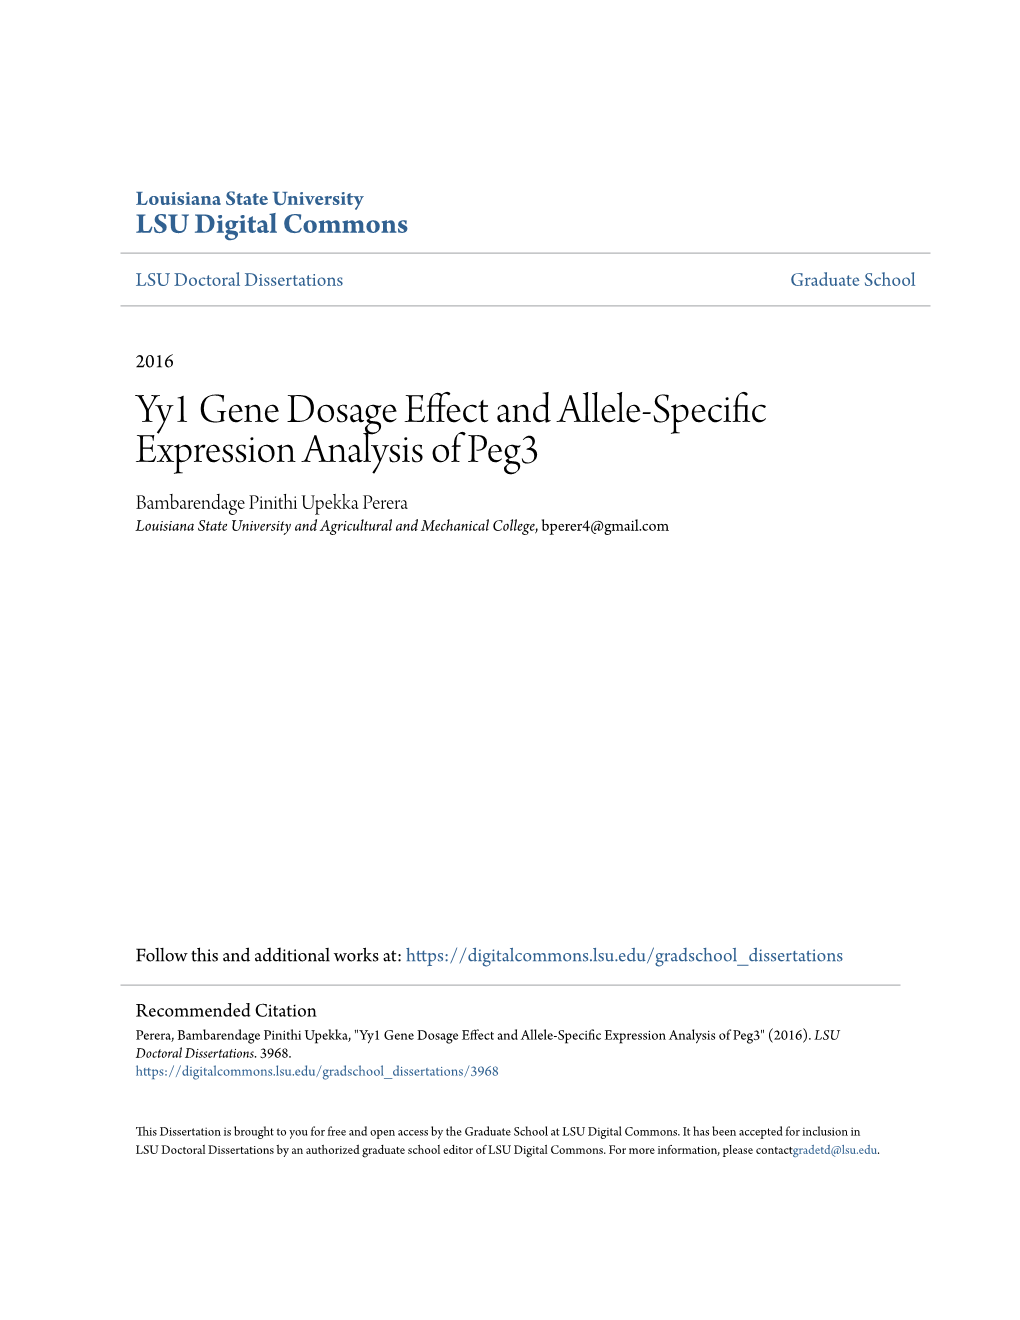 Yy1 Gene Dosage Effect and Allele-Specific Expression Analysis of Peg3